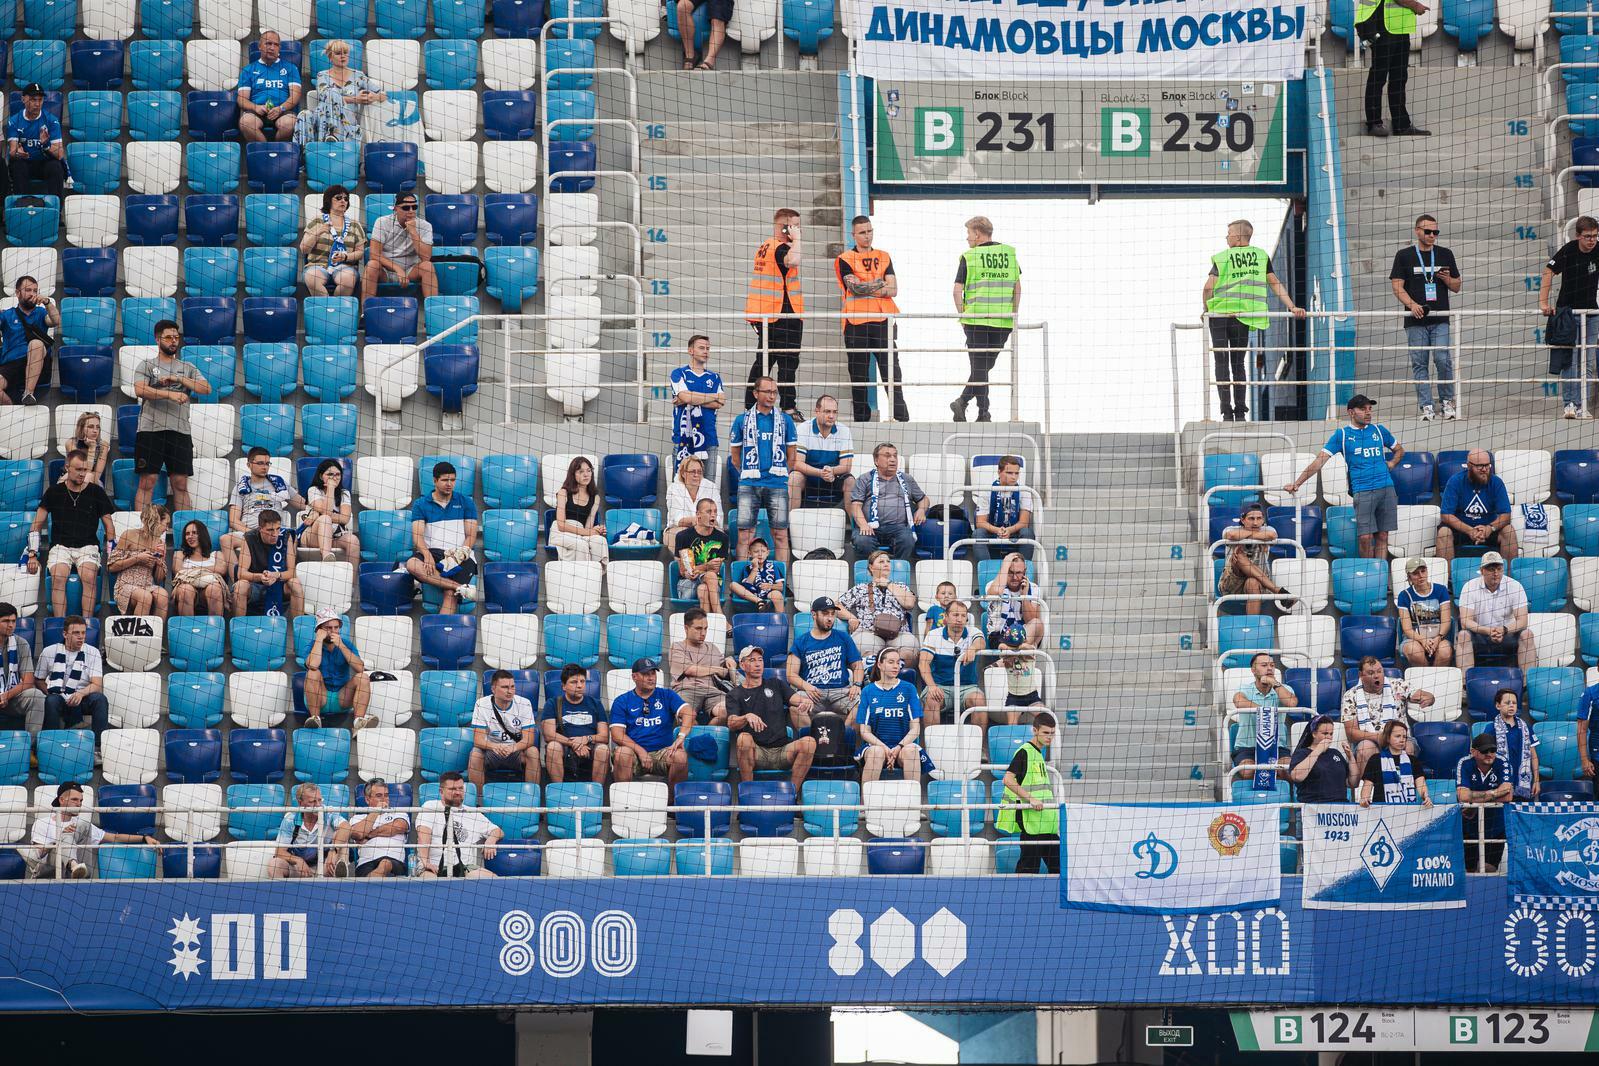 Information for fans planning to support the team in Nizhny Novgorod